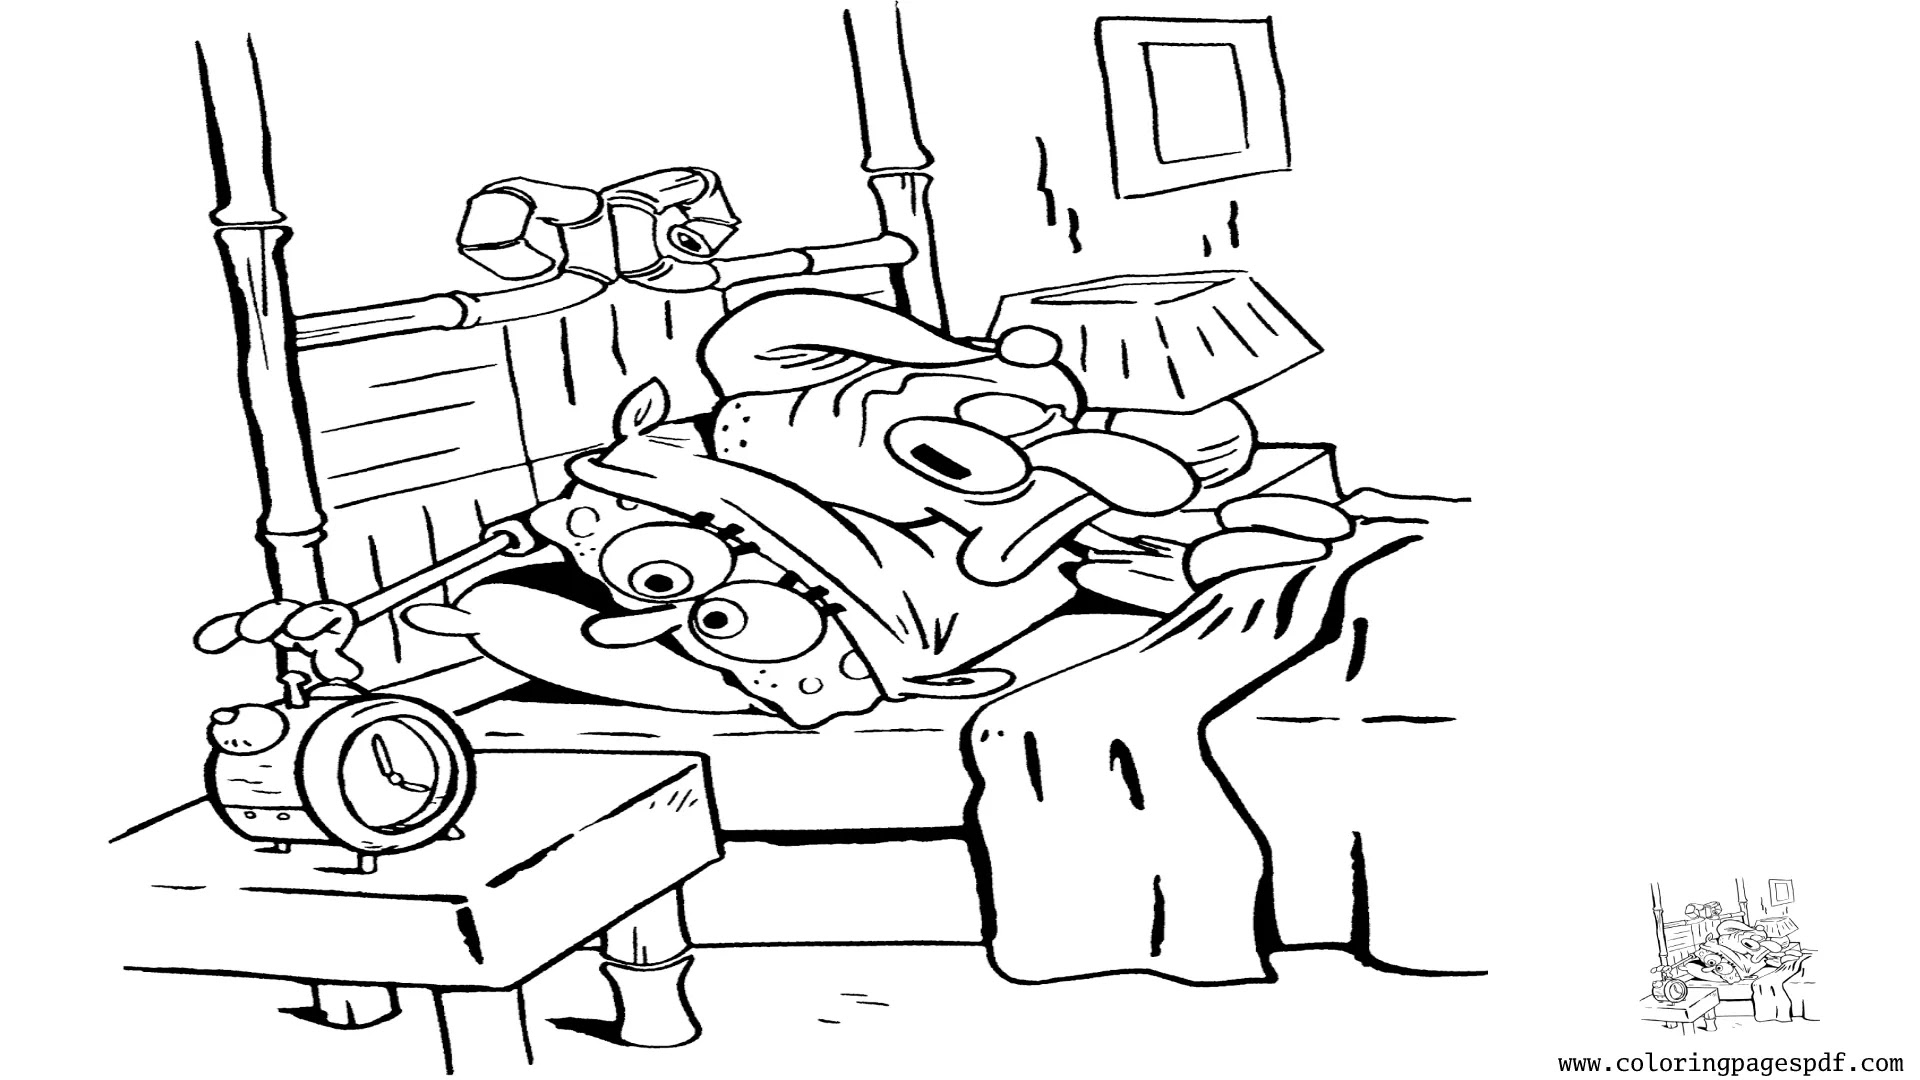 Coloring Pages Of SpongeBob Under Squidward's Pillow